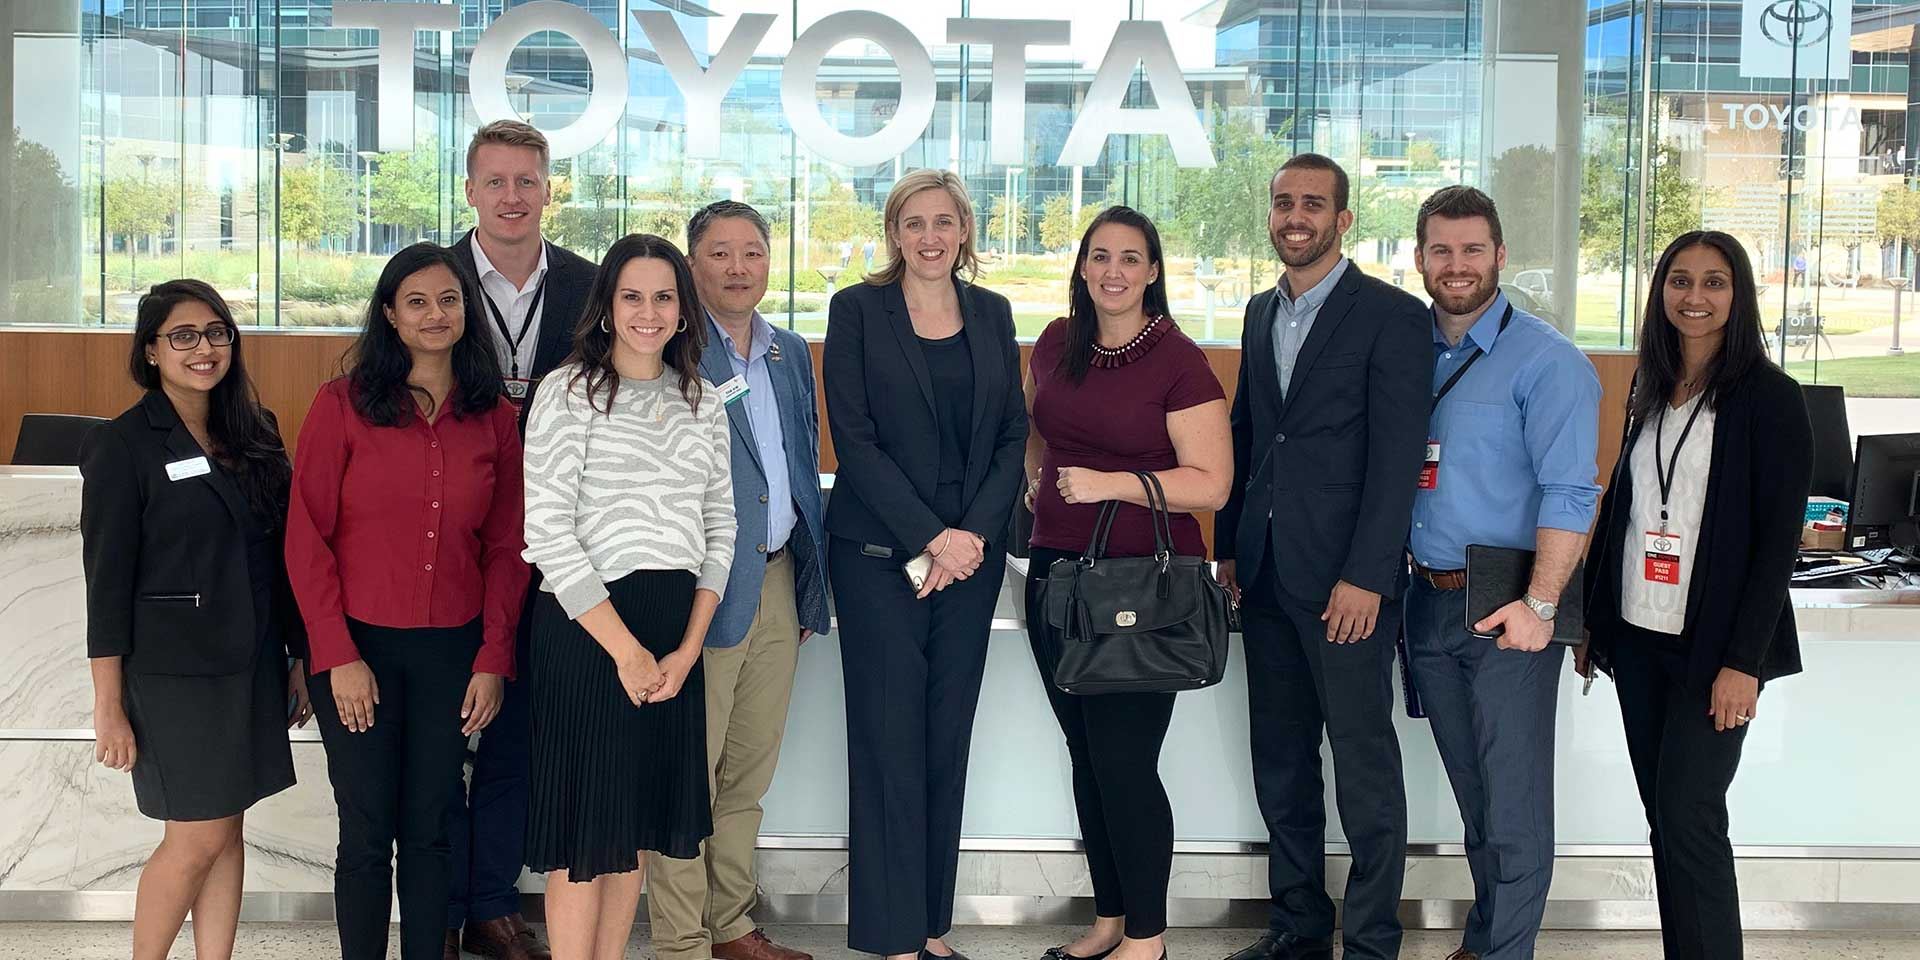 Jindal School MBA students with executives at a Toyota site visit